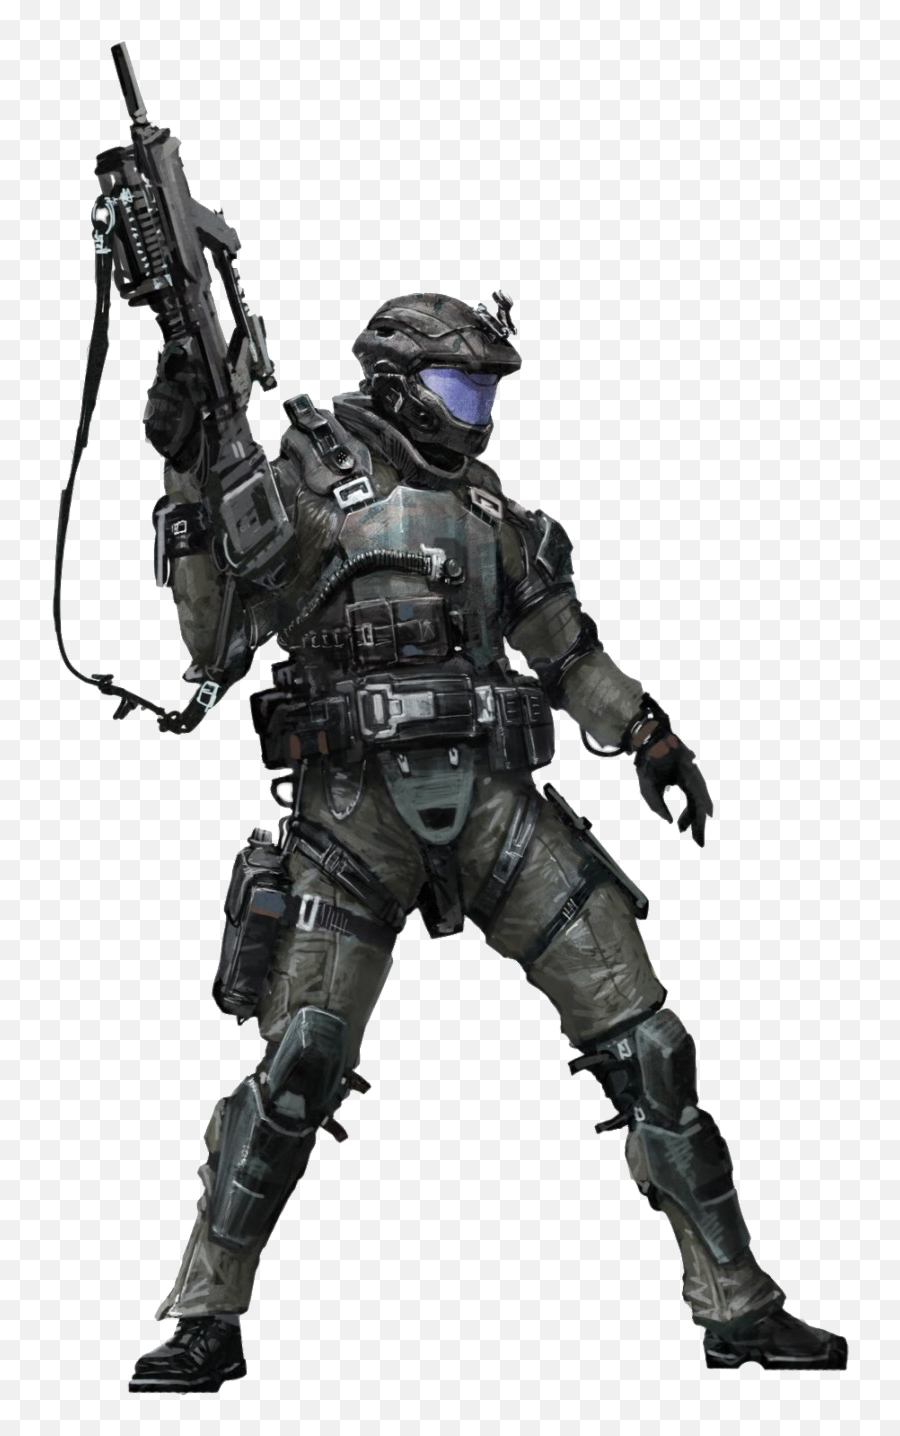 Halo Png Hd Quality Real - Halo 3 Marine Concept Art,Halo Png